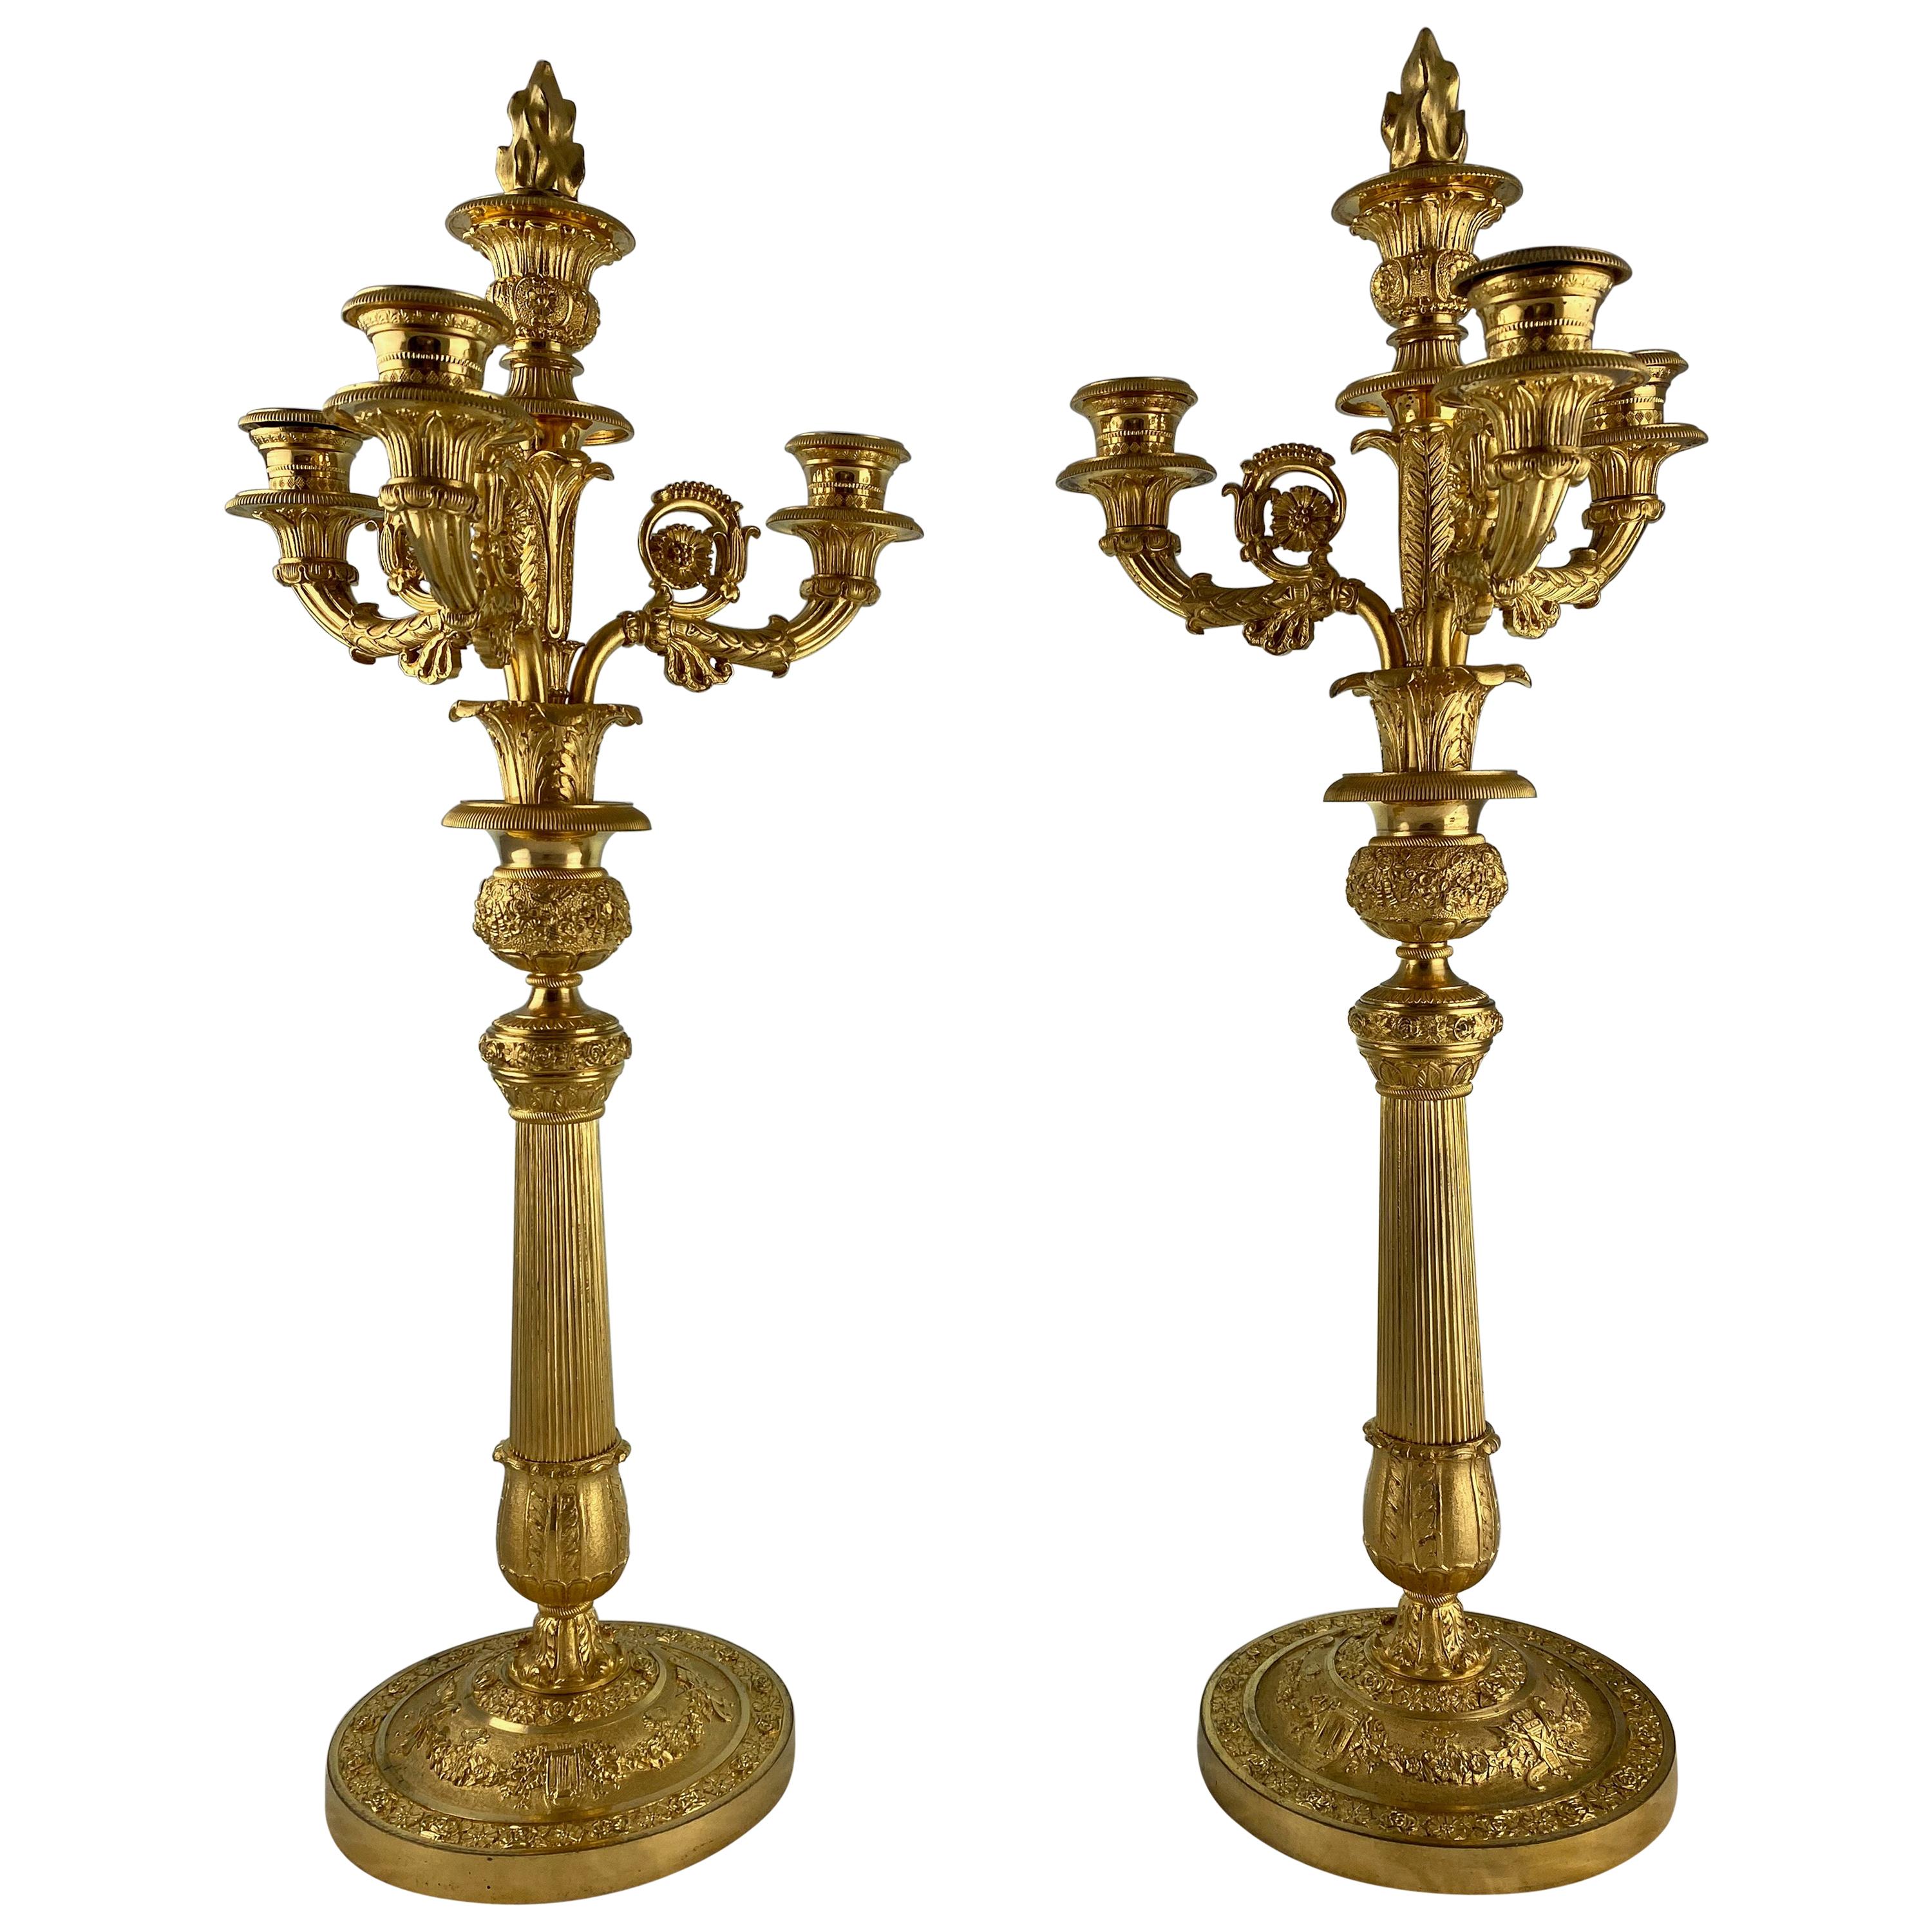 Pair of French Empire Candelabra, 1820